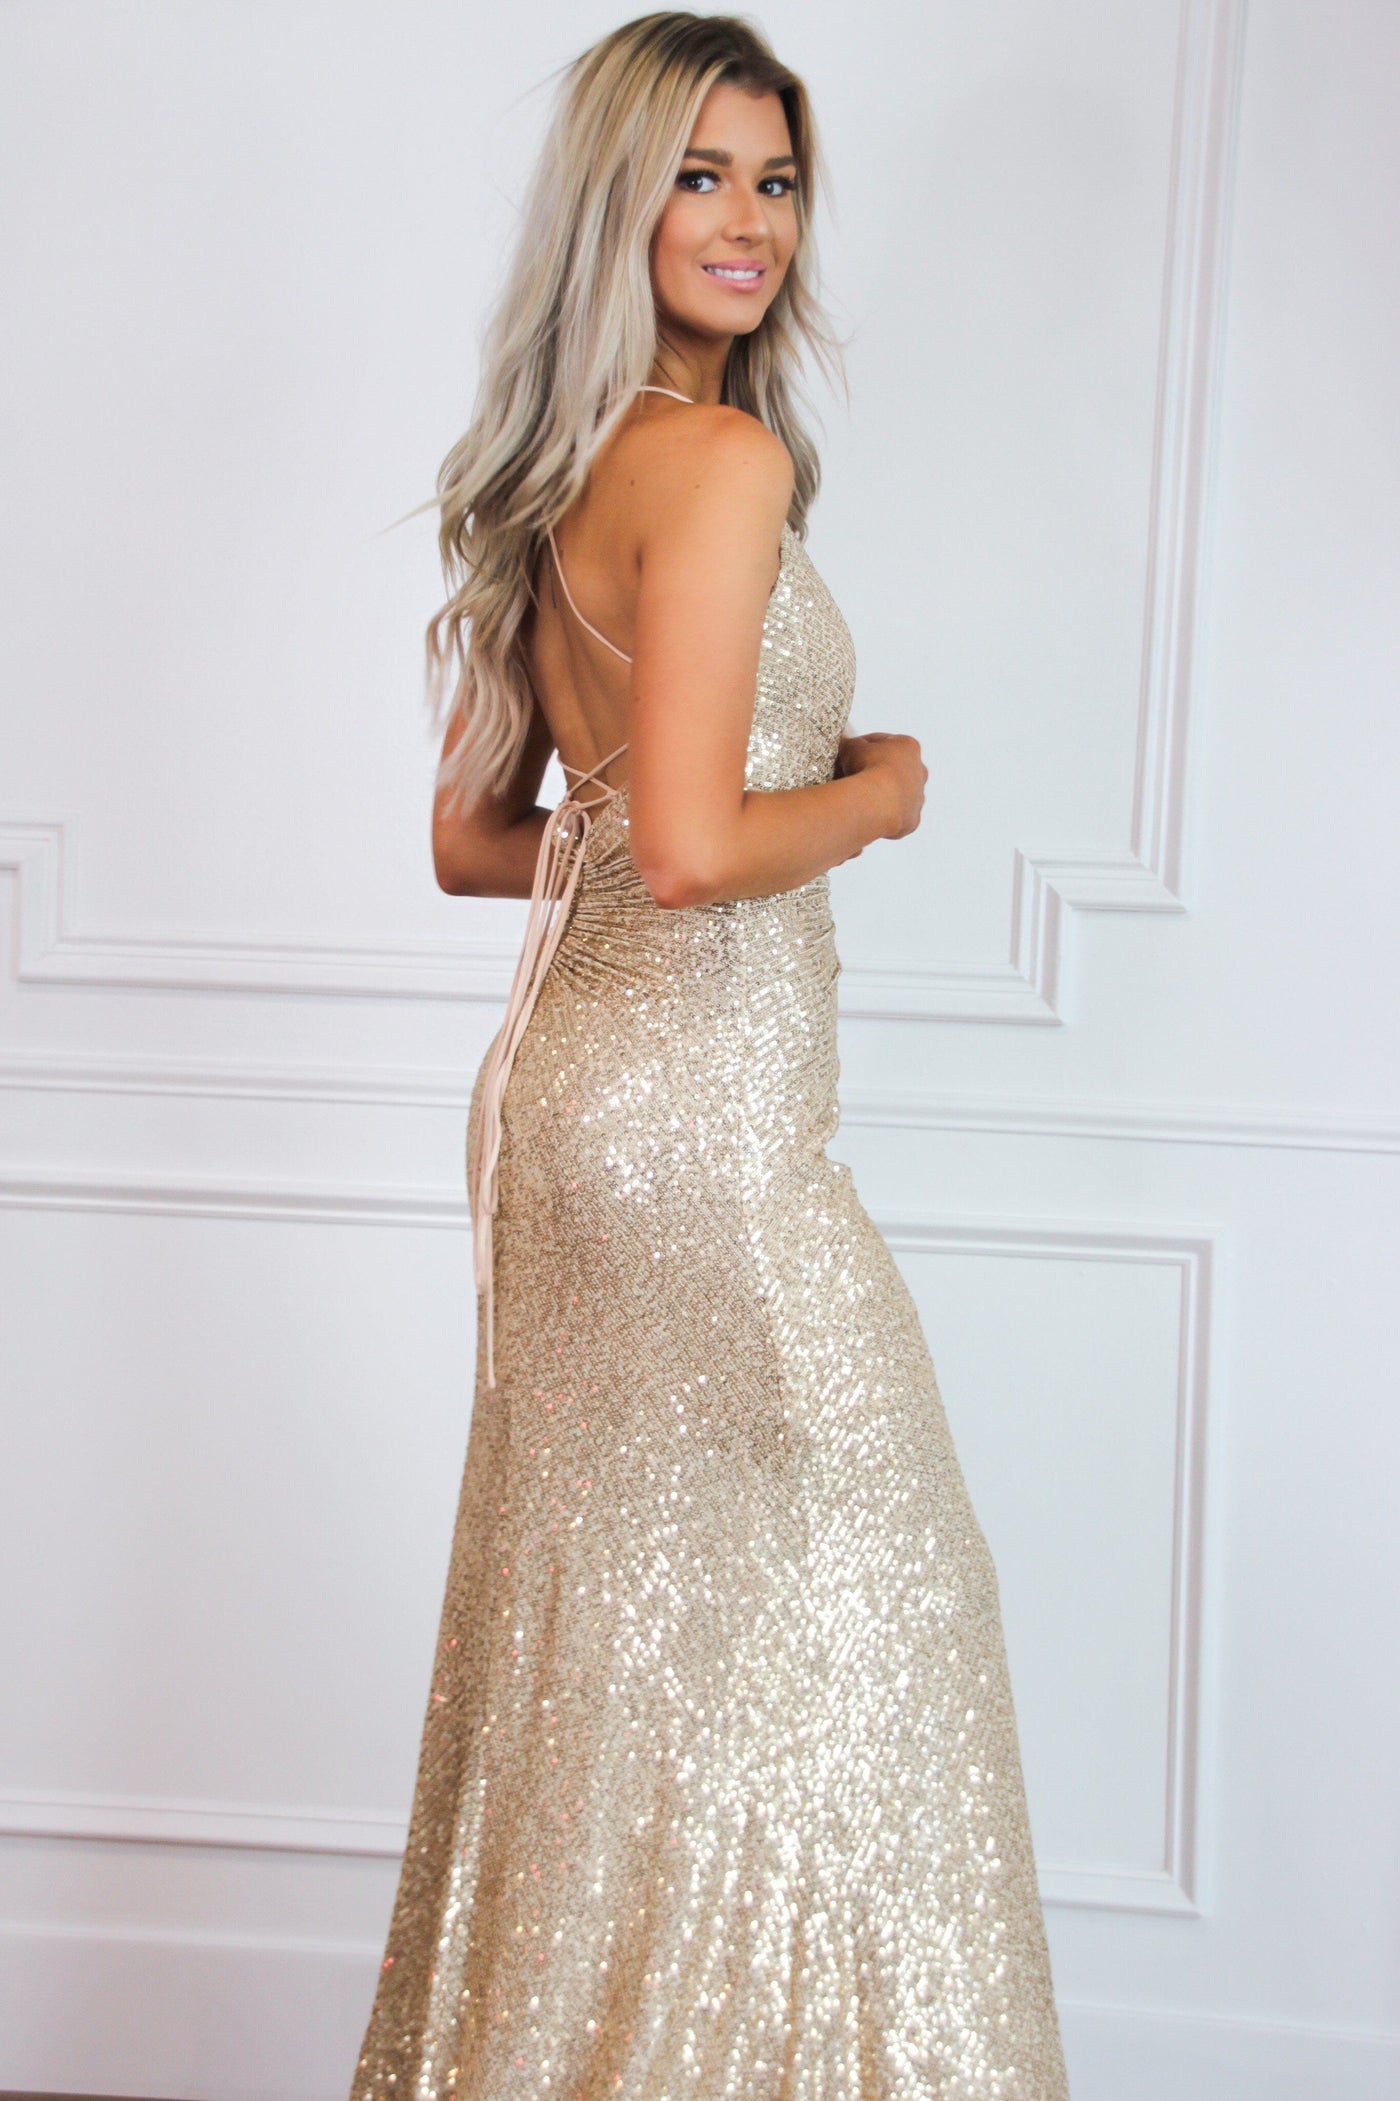 Wherever You Go Sequin Formal Dress: Gold - Bella and Bloom Boutique